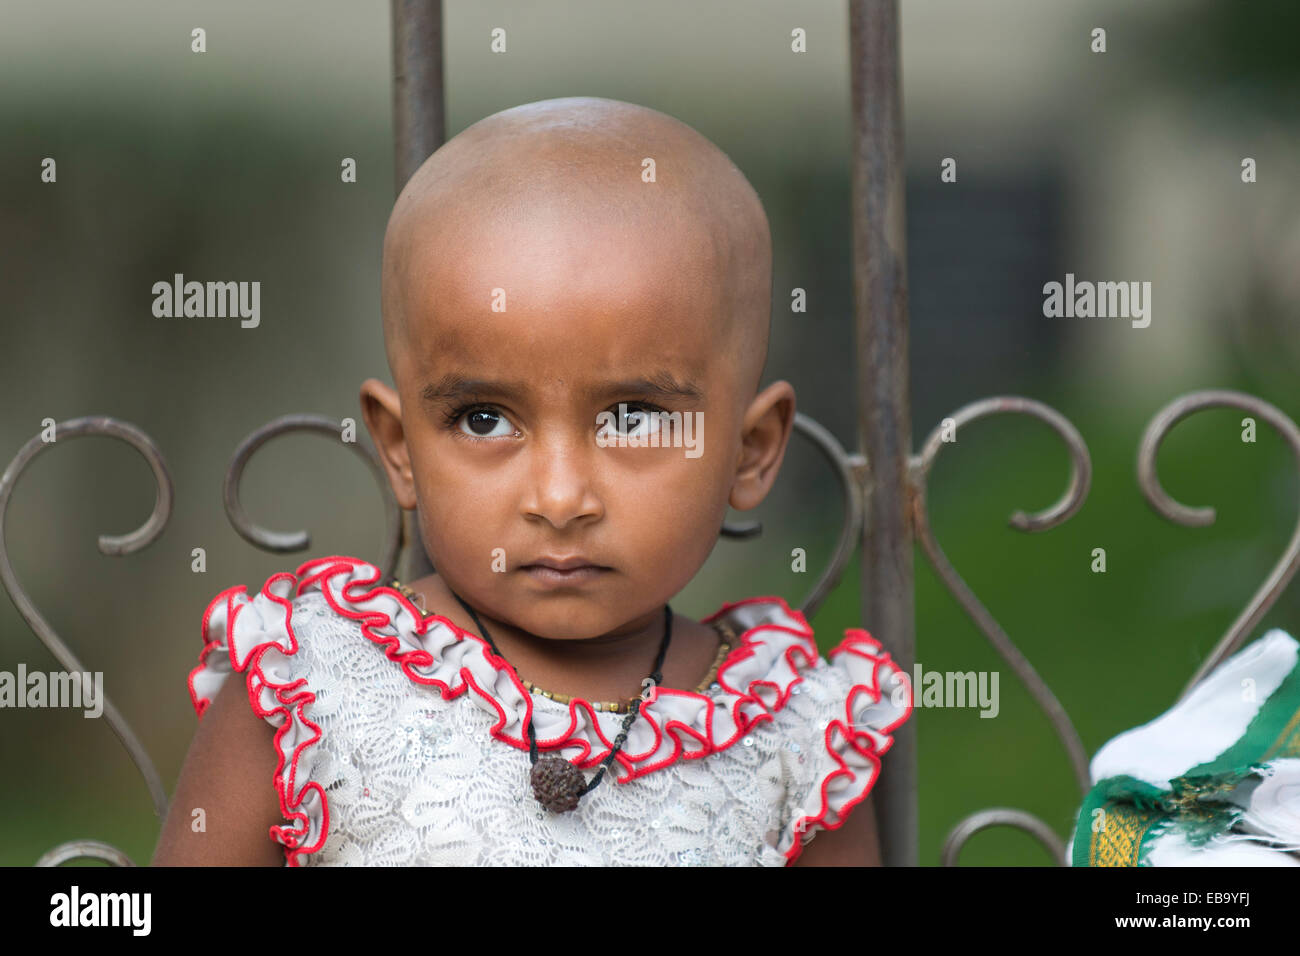 Girl with a shaved head after making a sacrificial offering, portrait, Meenakshi Amman Temple or Sri Meenakshi Sundareswarar Stock Photo